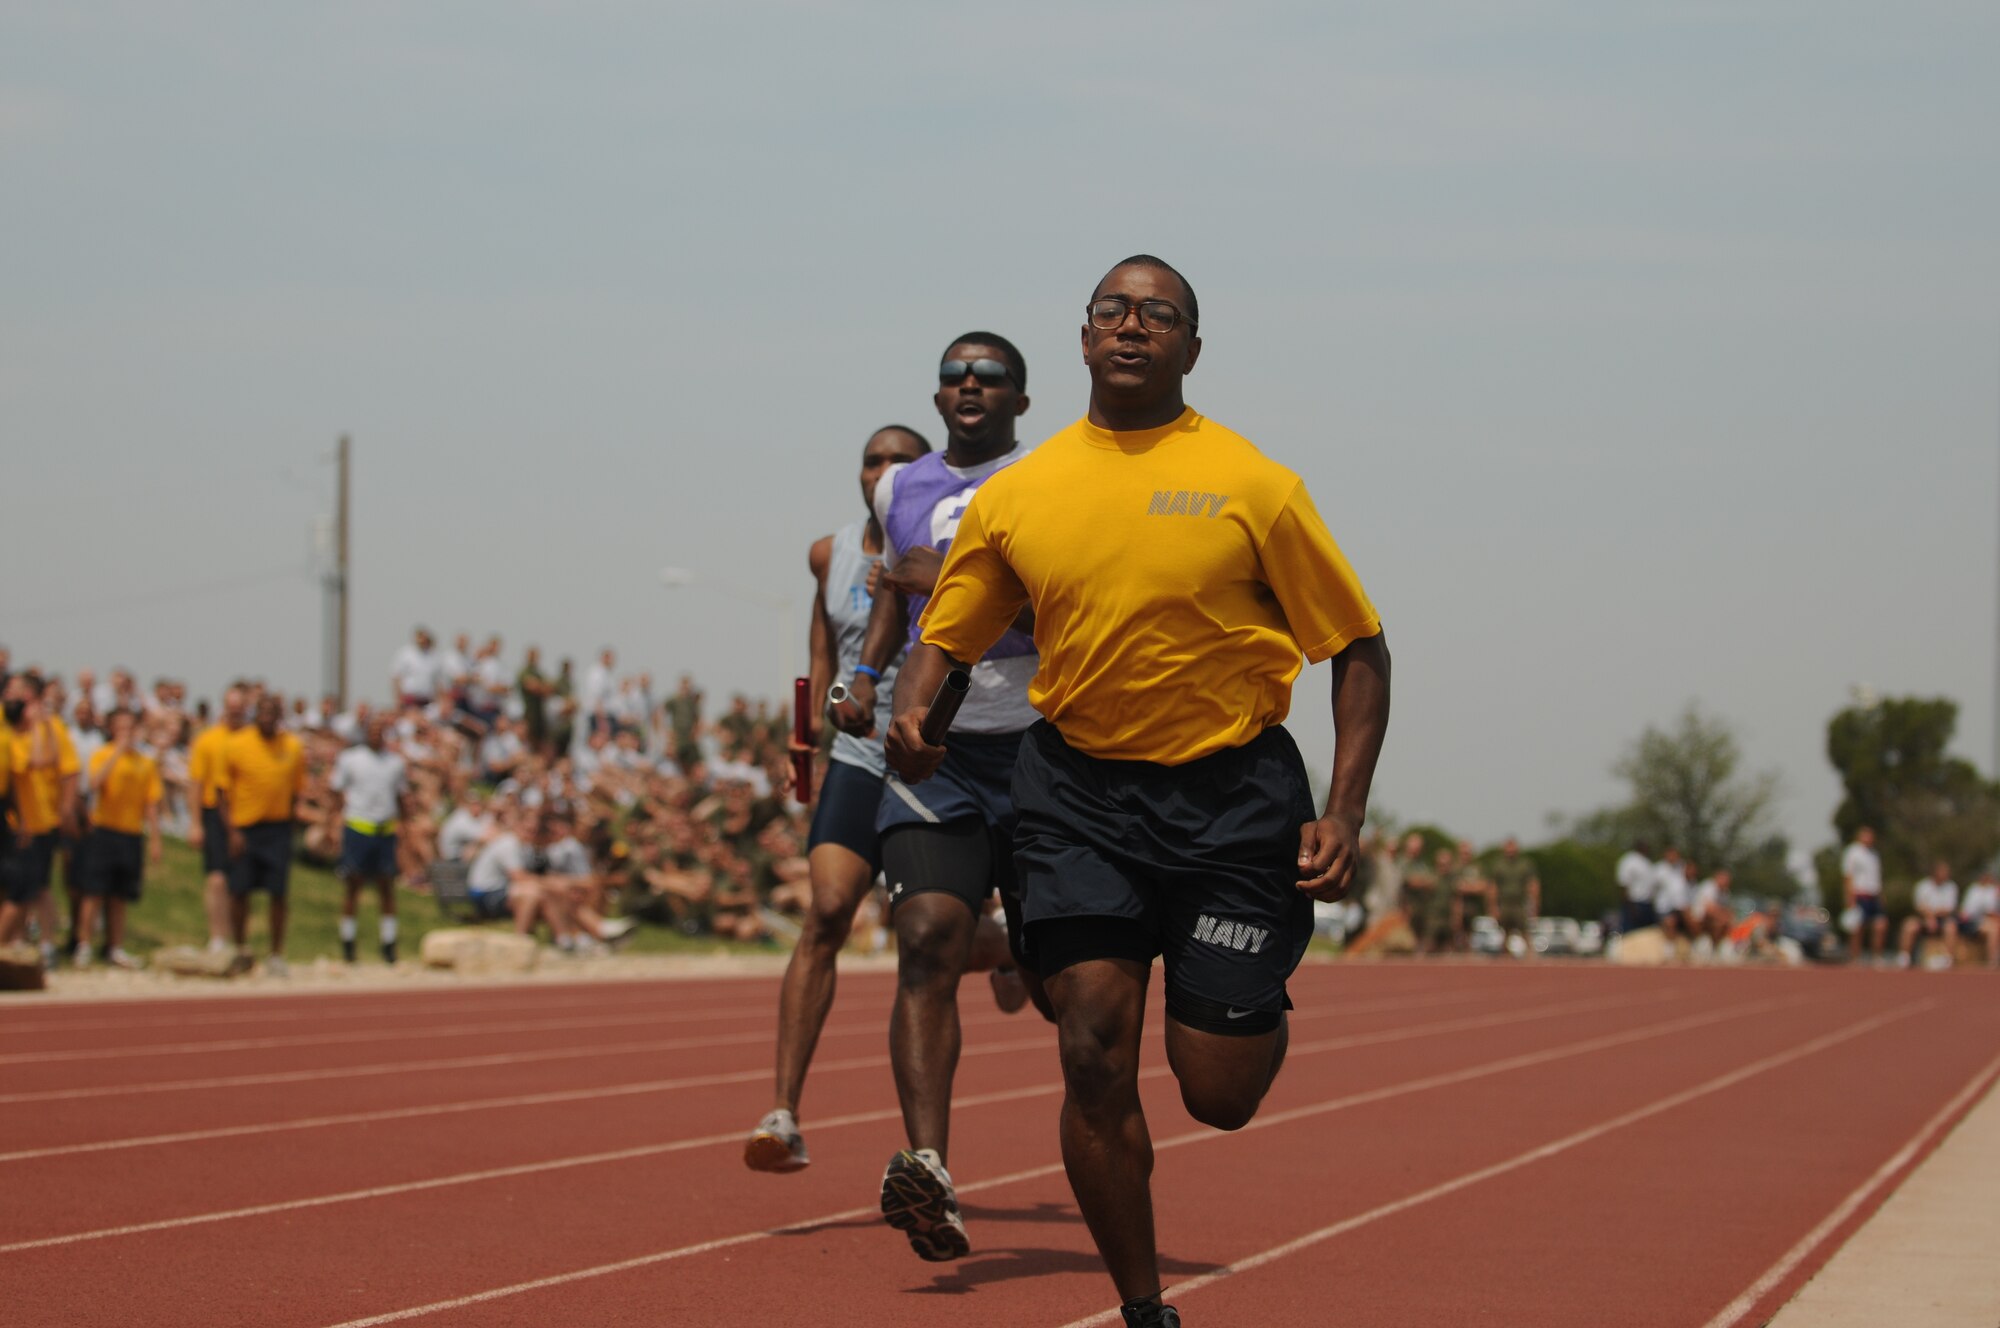 GOODFELLOW AIR FORCE BASE, Texas -- Team Goodfellow members participate in a one mile relay race May 27. Team Goodfellow devoted the day to safety and sports to kick off the 101 critical days of summer. (U.S. Air Force photo/Staff Sgt. Heather L Rodgers)